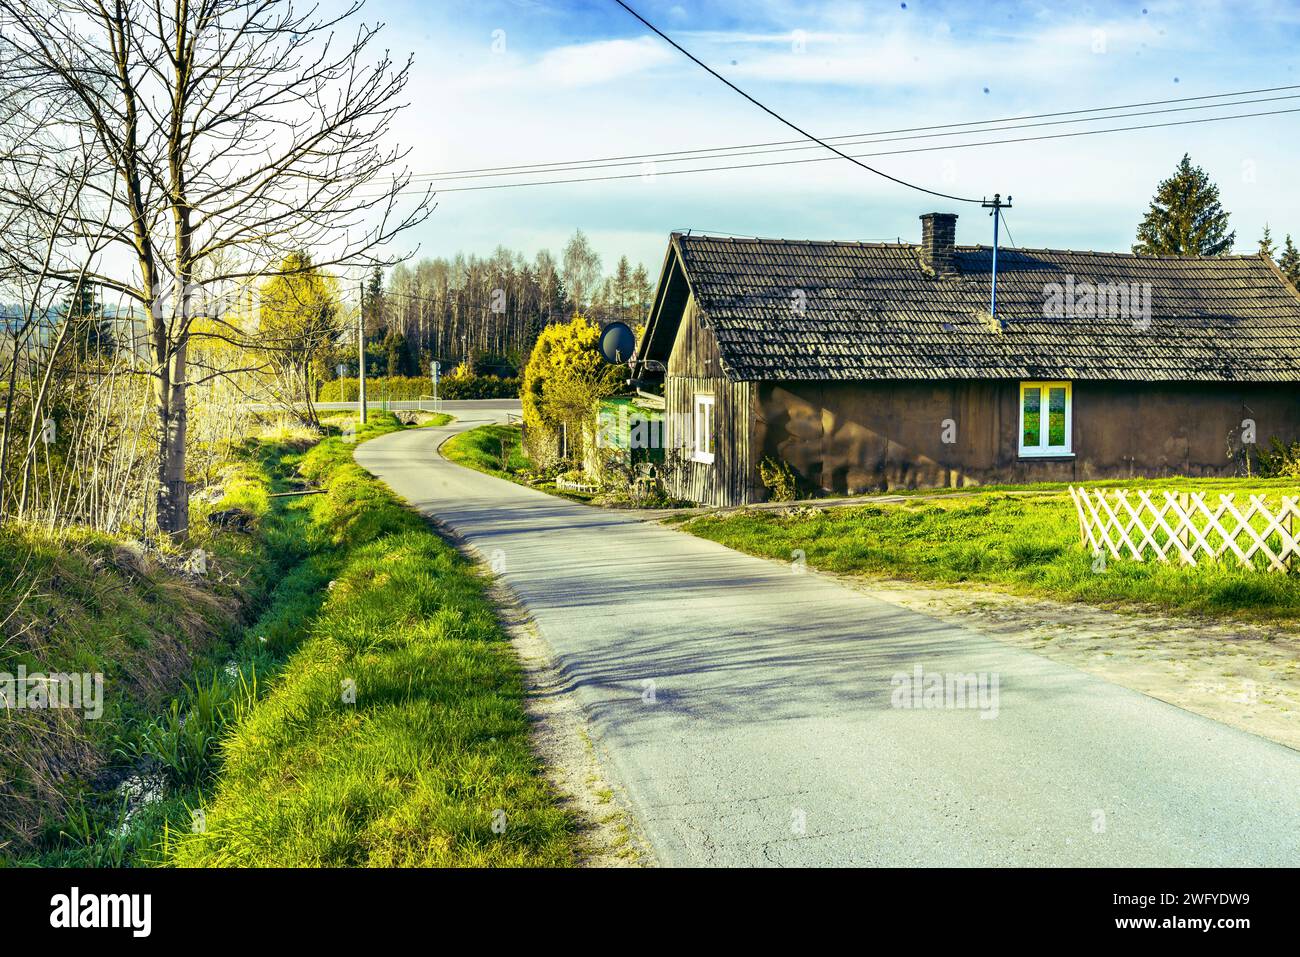 Old wooden house in the village. Rural landscape. Vintage style. Poland. Stock Photo